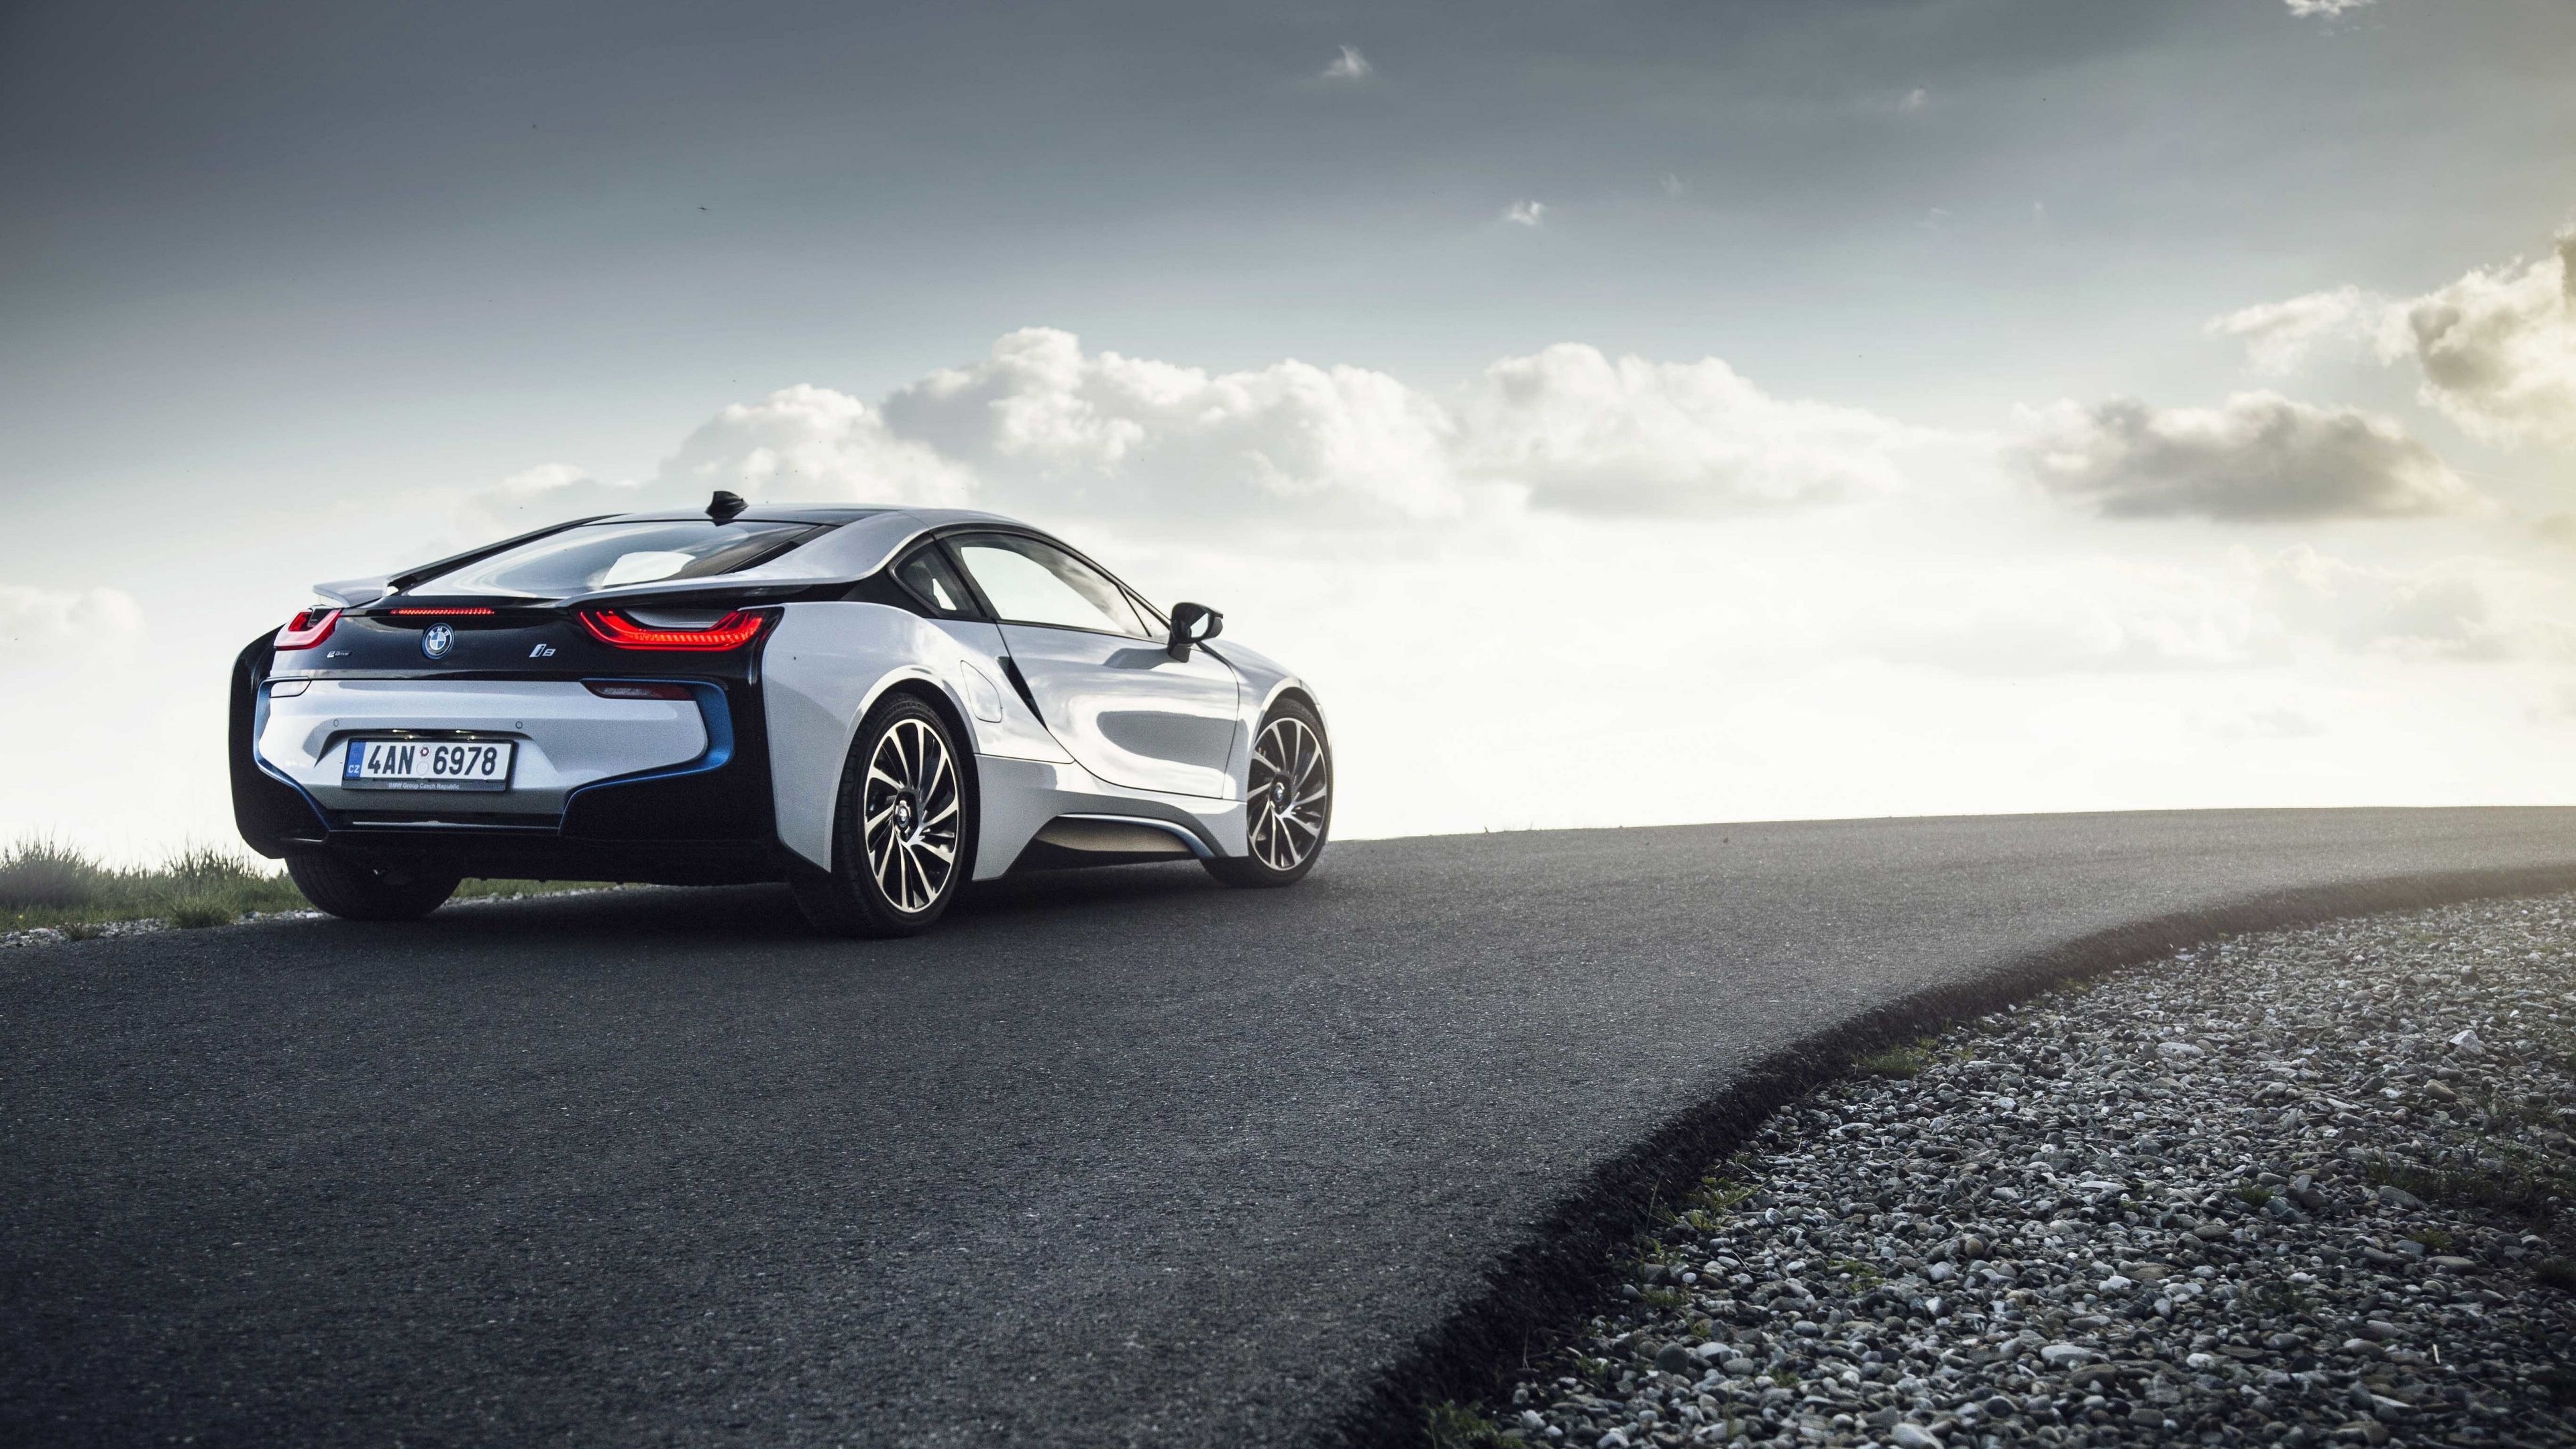 BMW i8 Rear view road 4K wallpaper, Sleek aesthetics, Dynamic performance, Unmatched style, Vision on the road, 3840x2160 4K Desktop